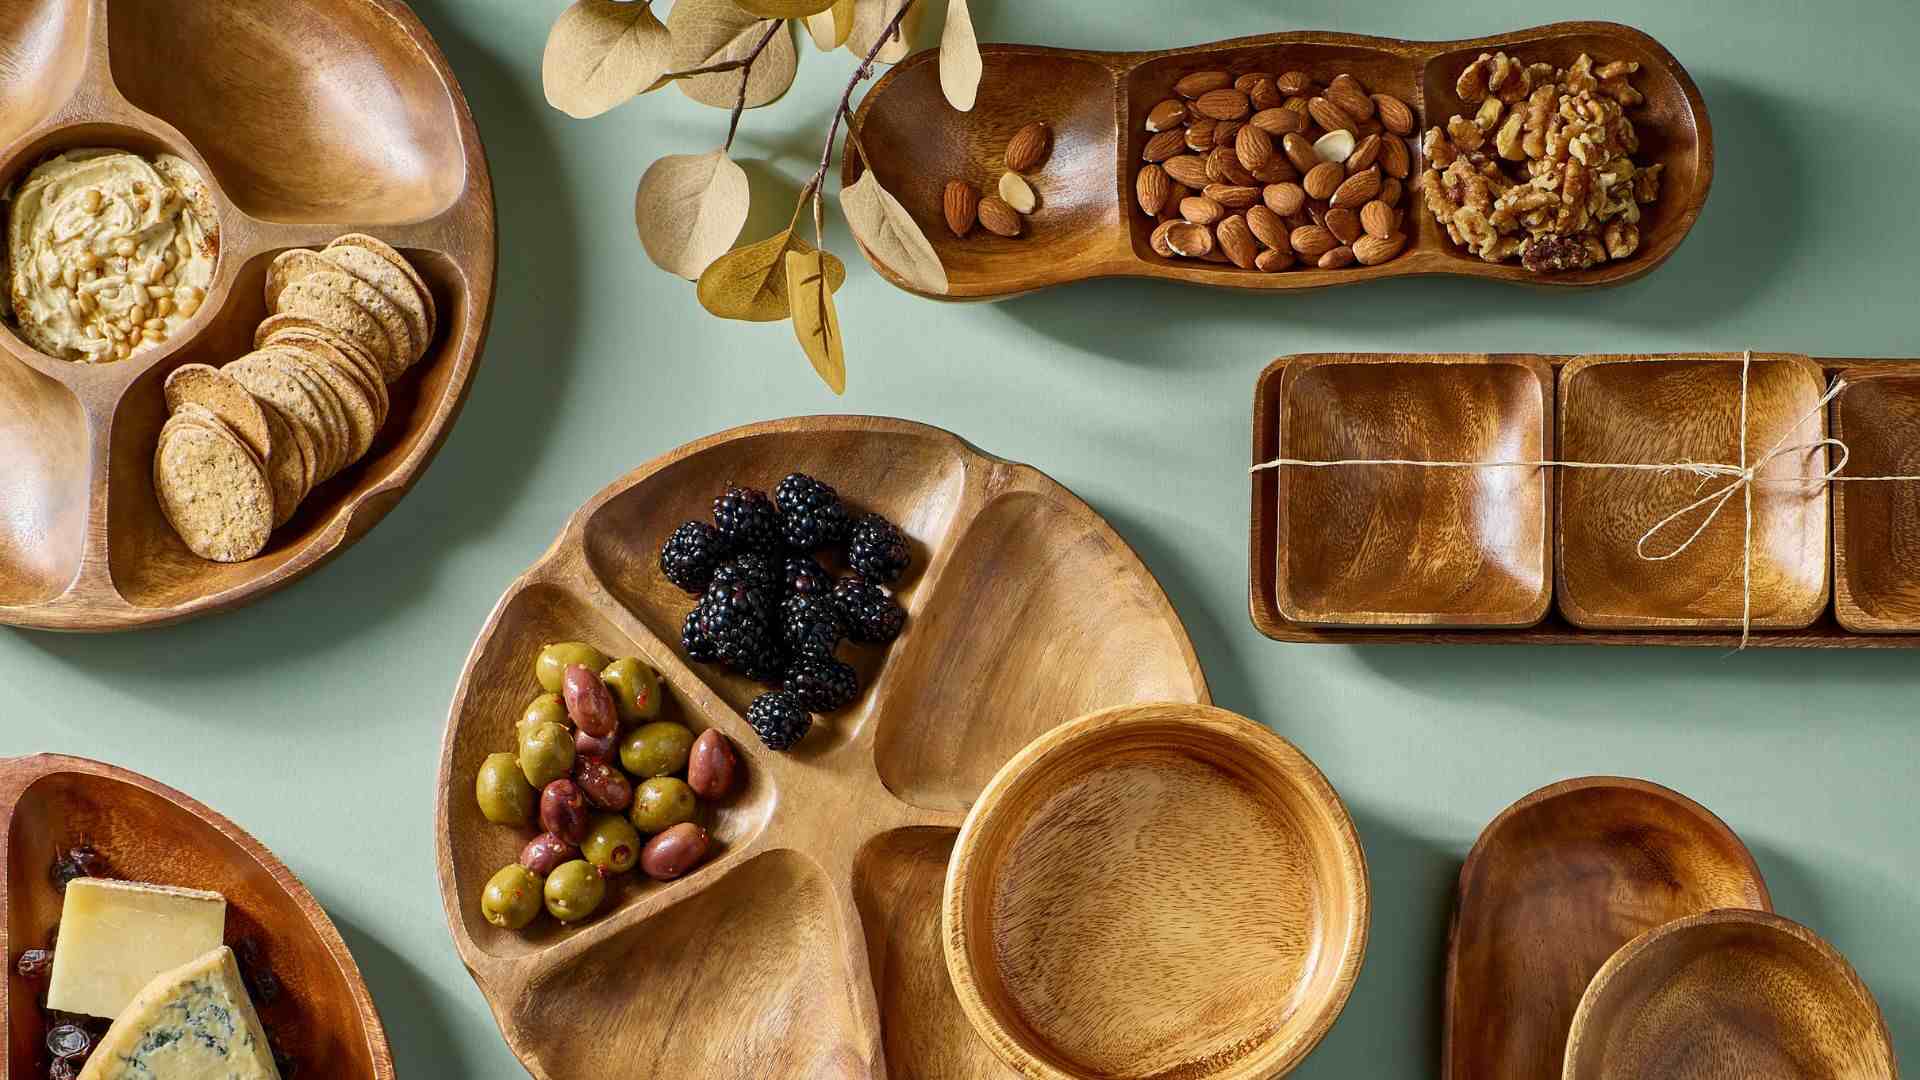 Popular Bowl And Plate Set Materials